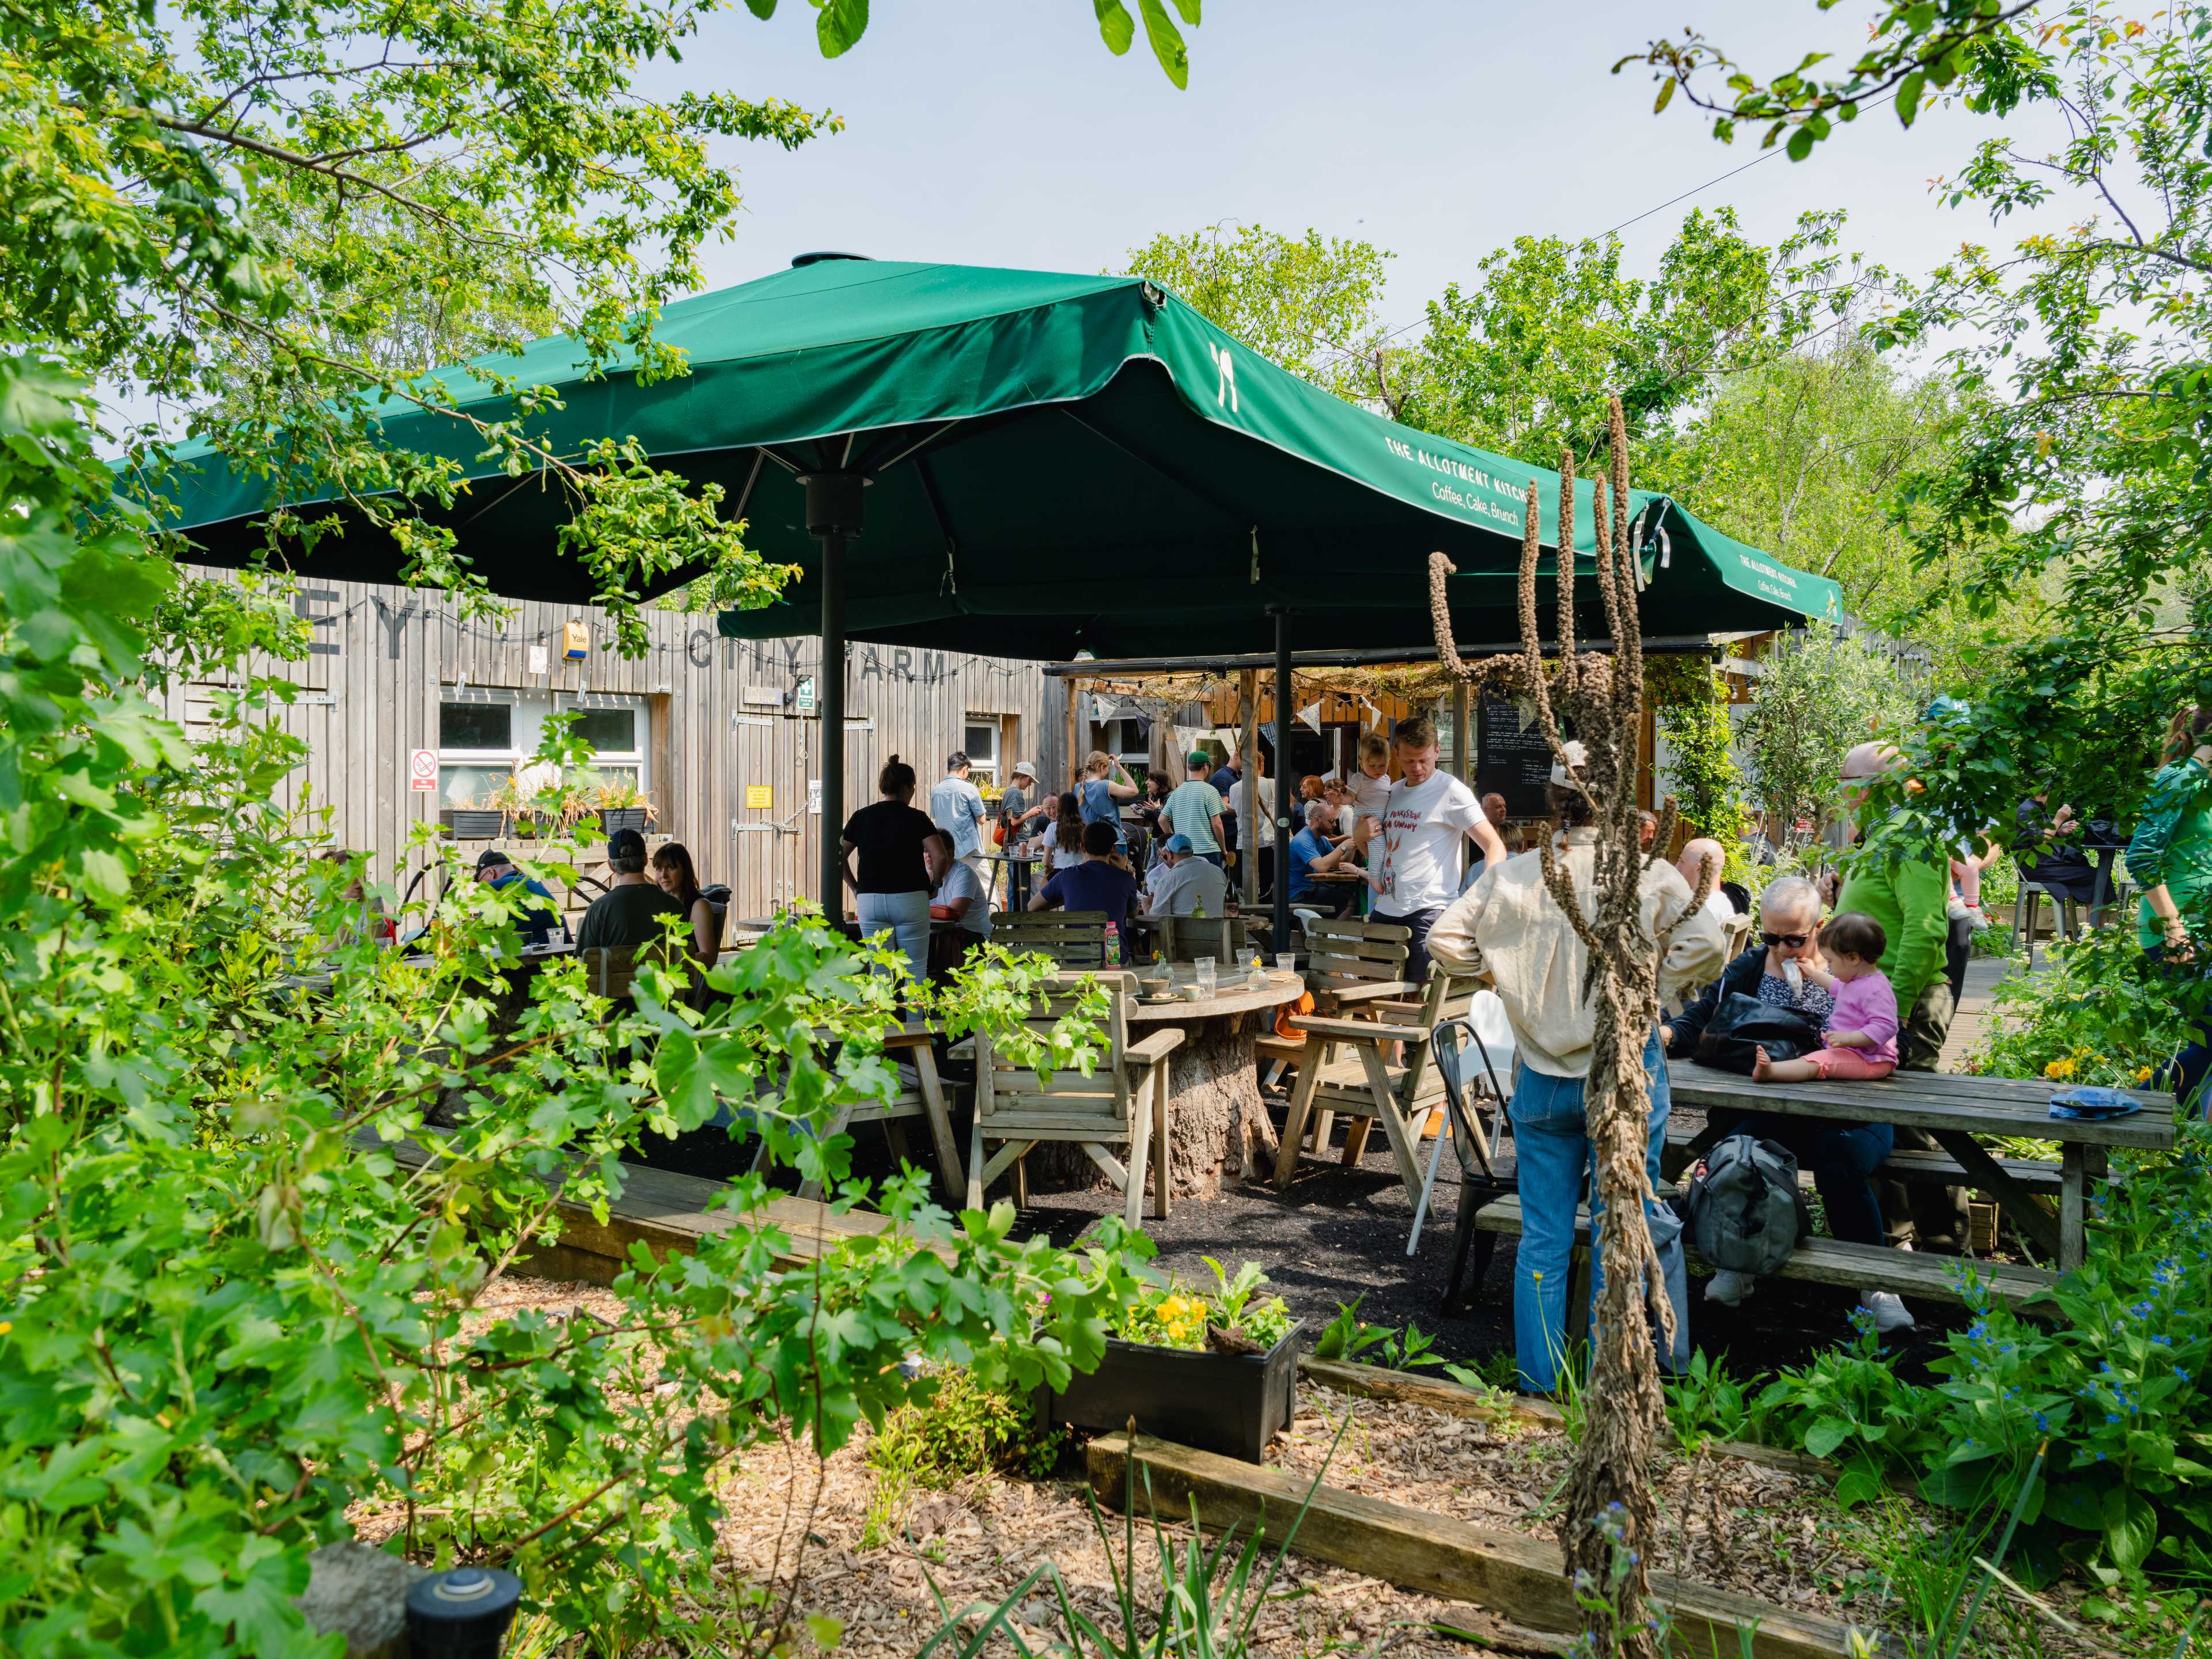 The foliage filled outdoor seating area at The Allotment Kitchen.